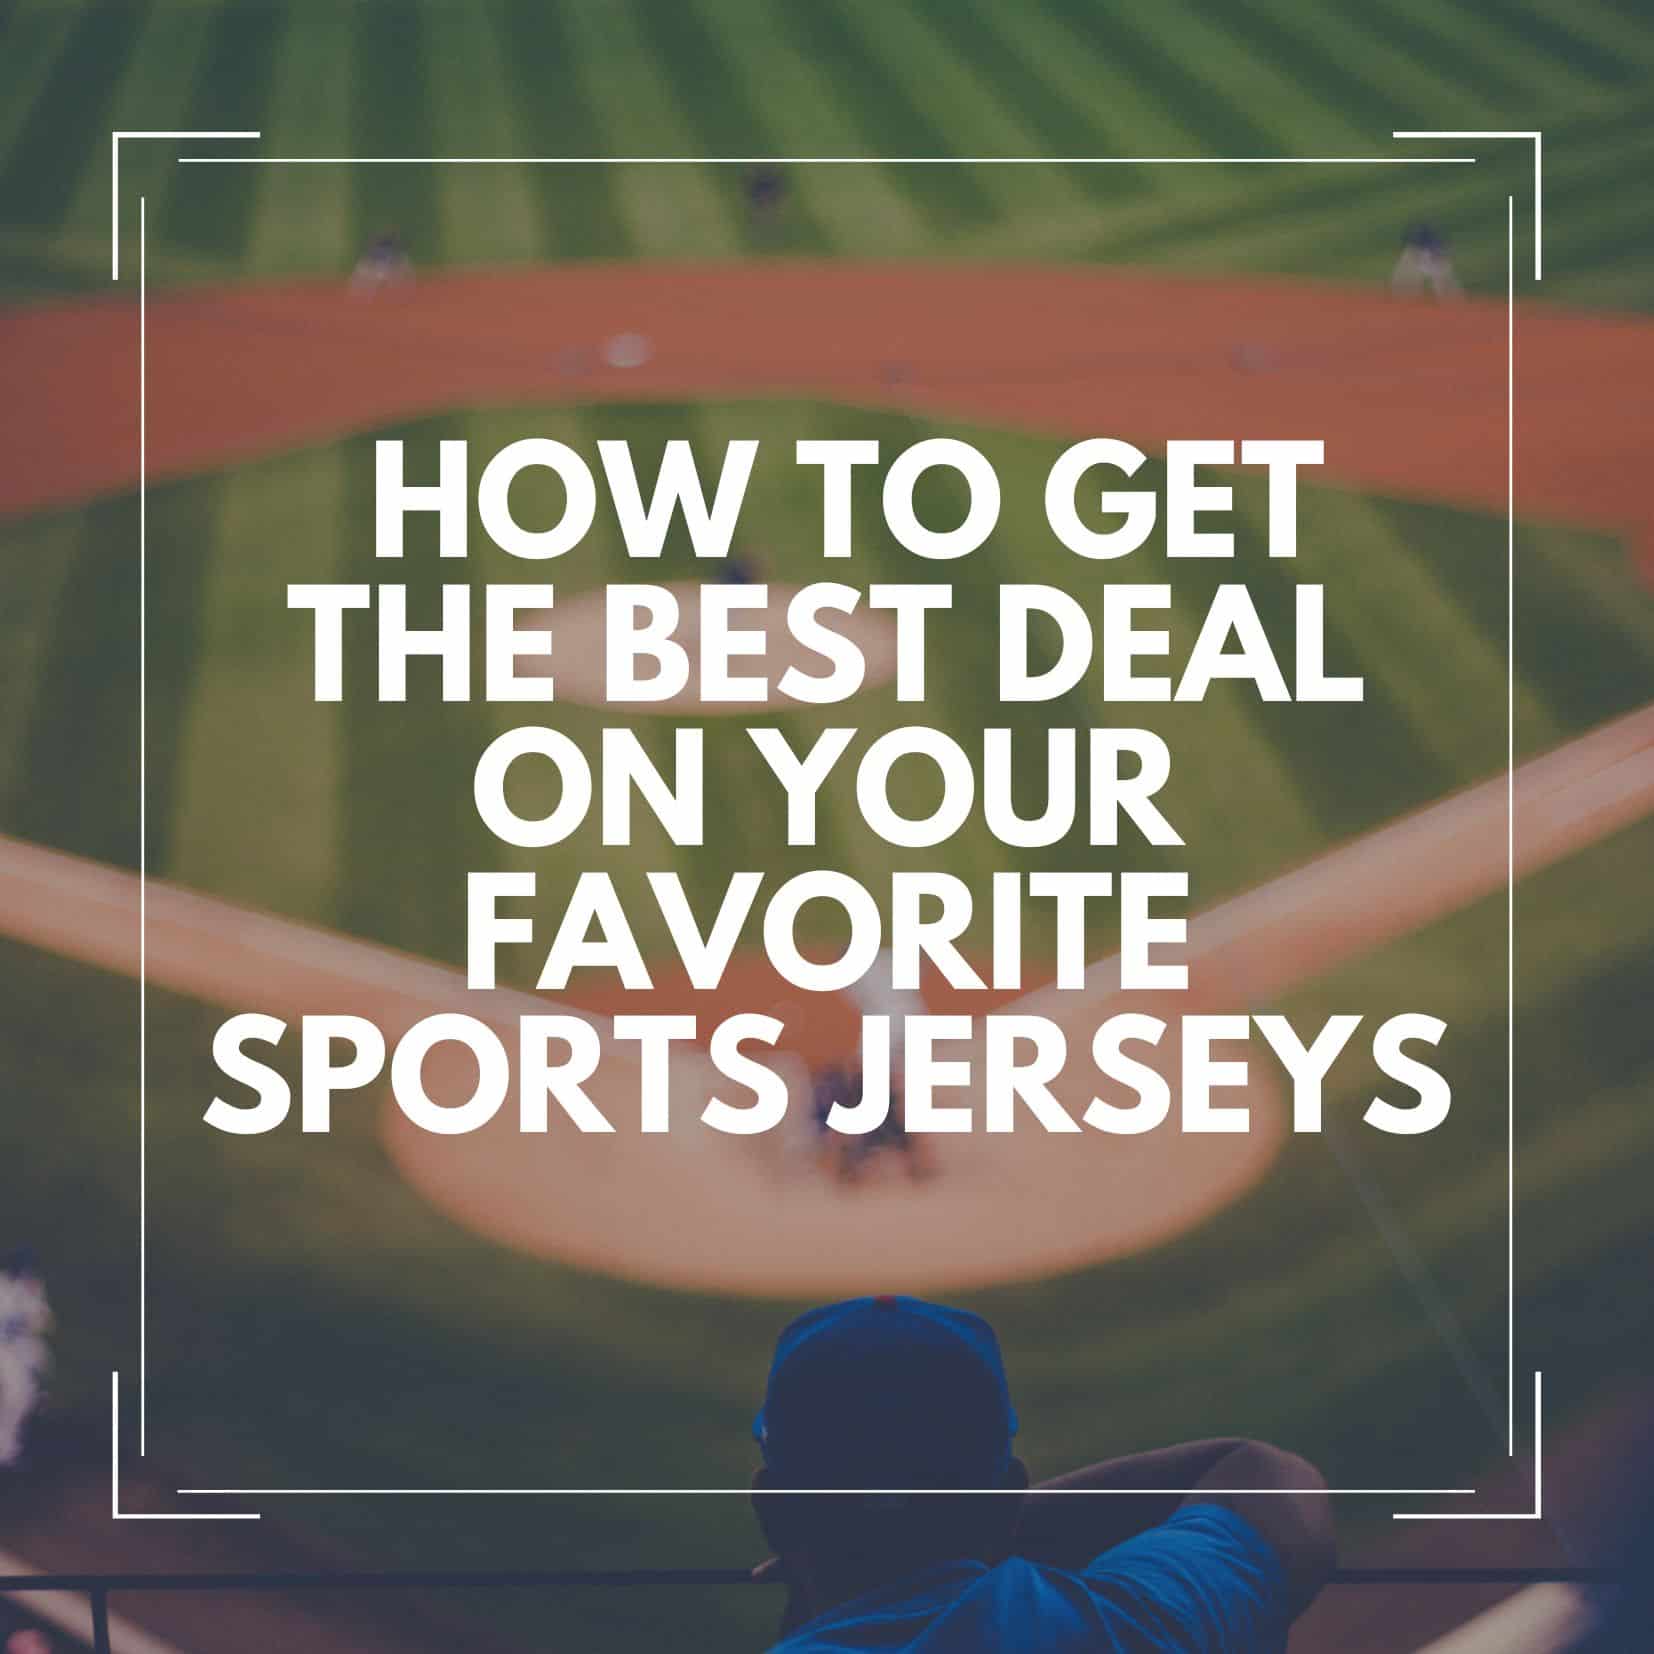 How to Get the Best Deal on Your Favorite Sports Jerseys